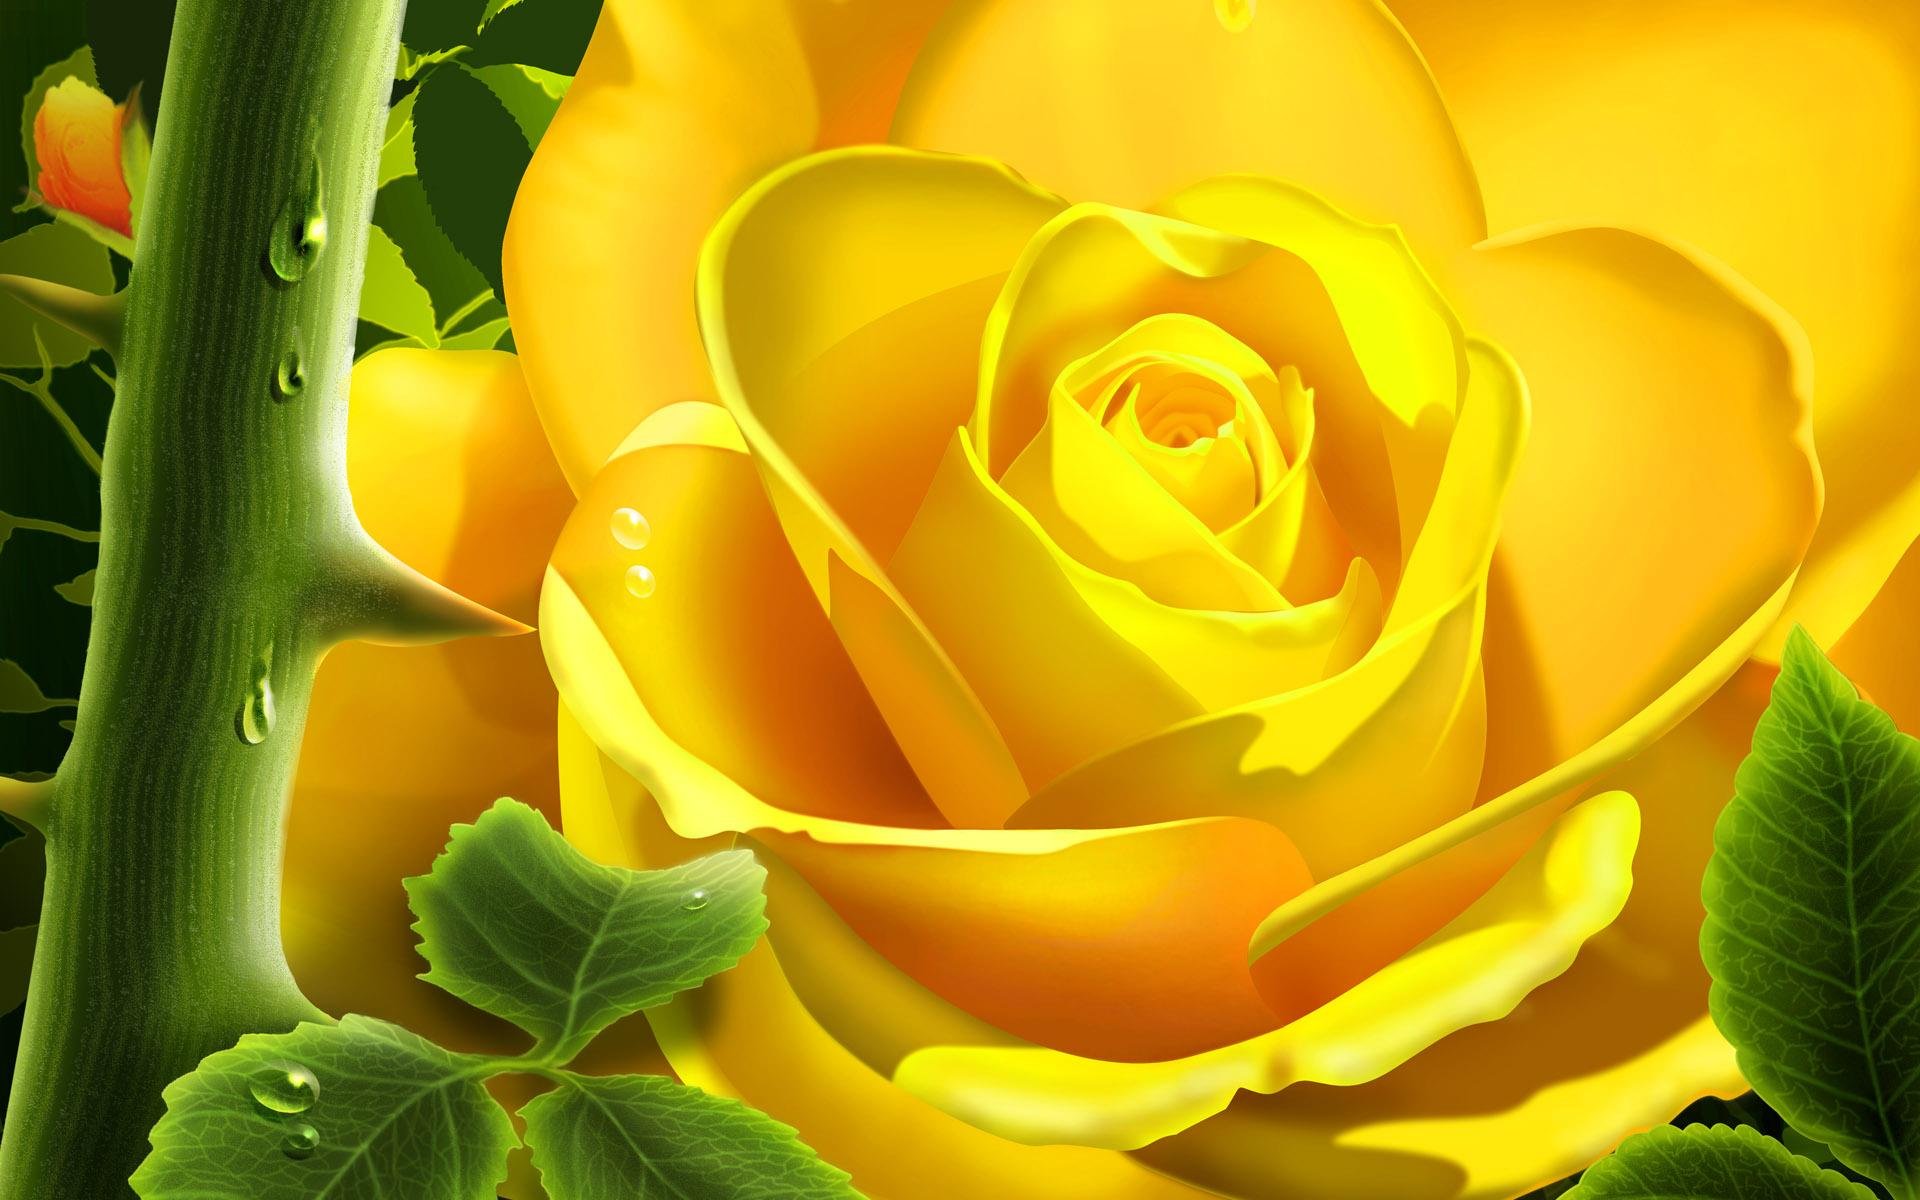 Vibrant yellow rose blooming in natural setting.